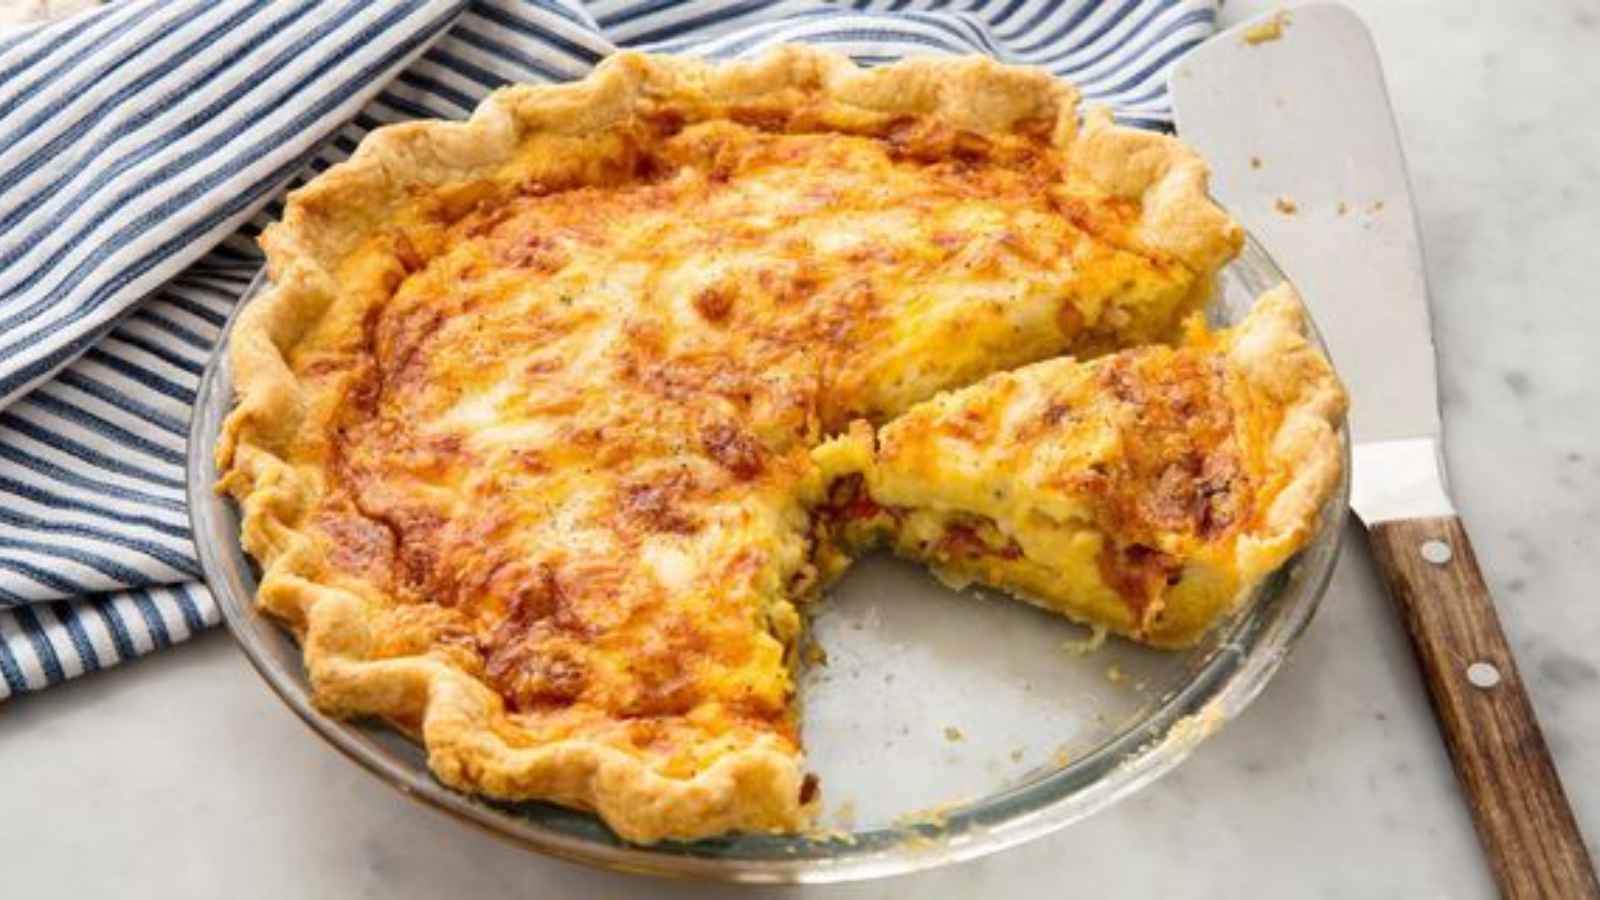 National Quiche Lorraine Day 2023: Date, History, Facts about Lorraine